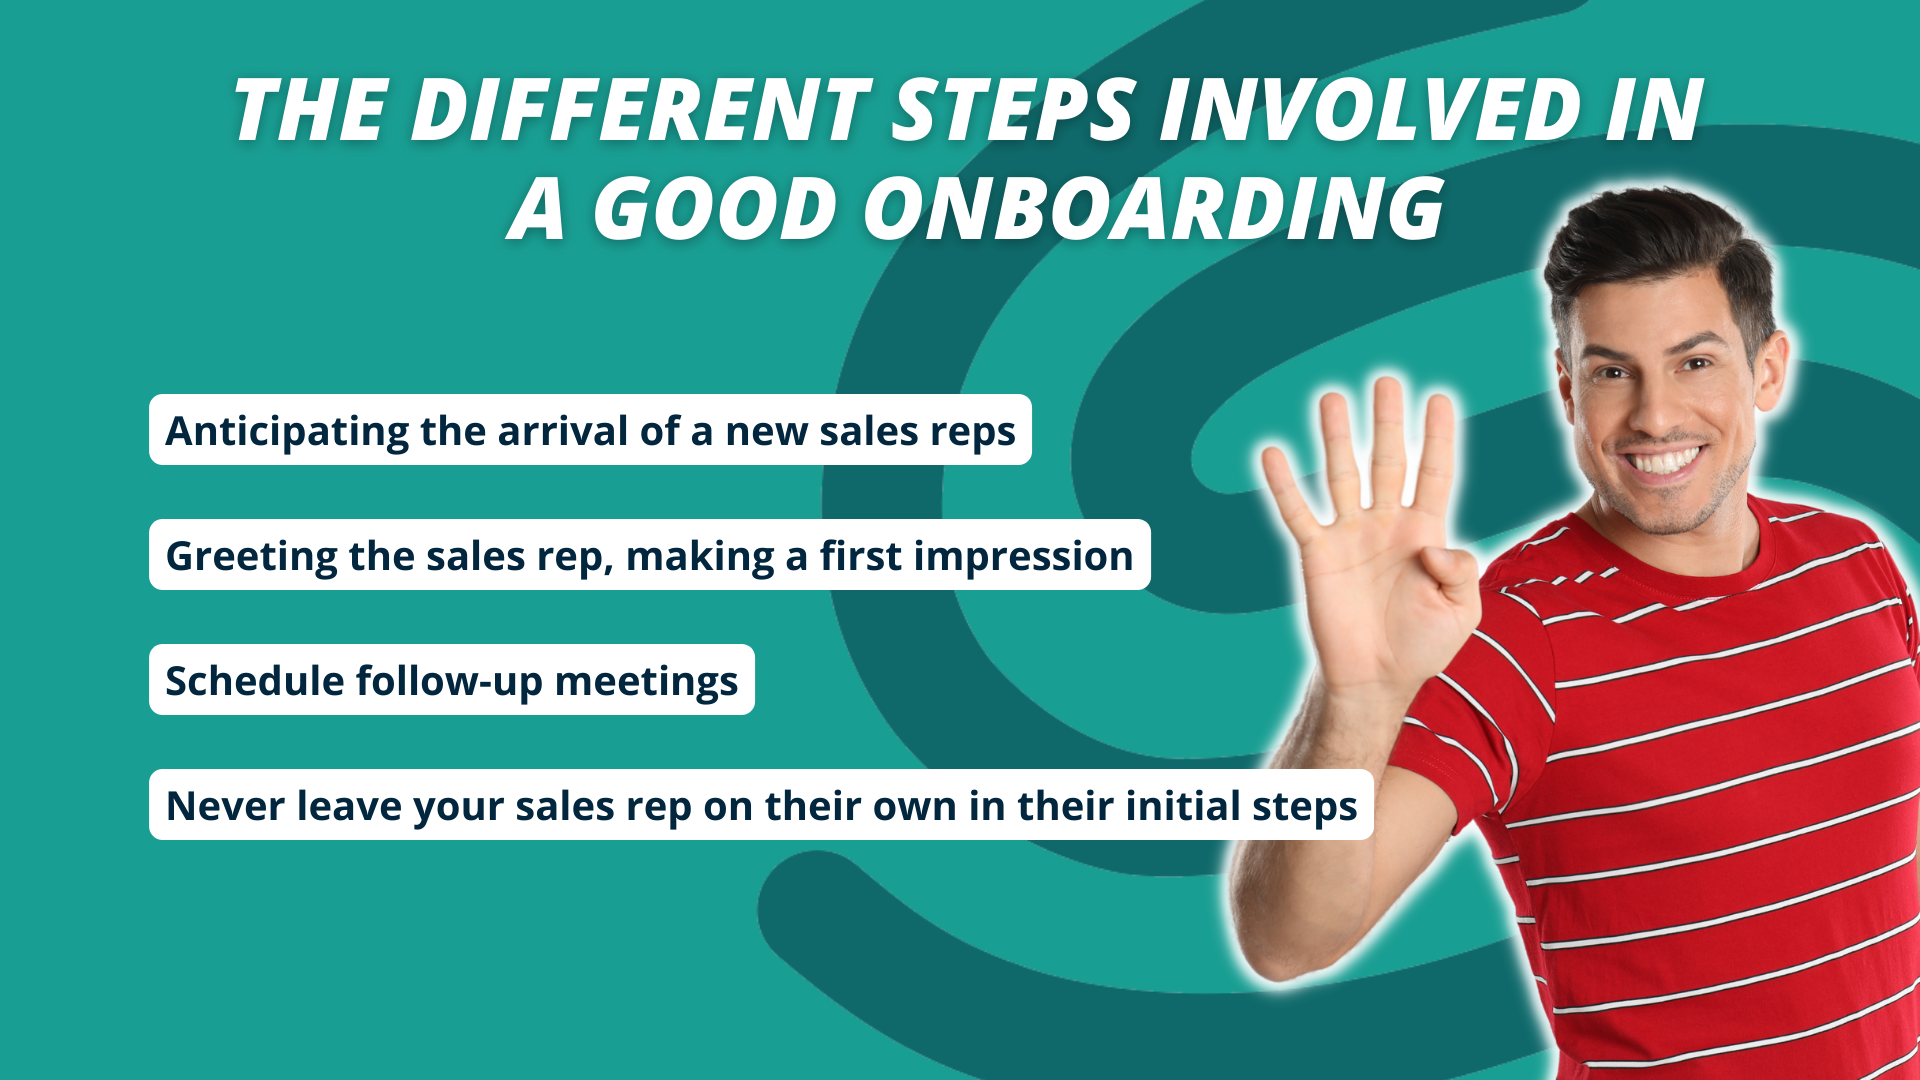 The different stages of successful sales onboarding